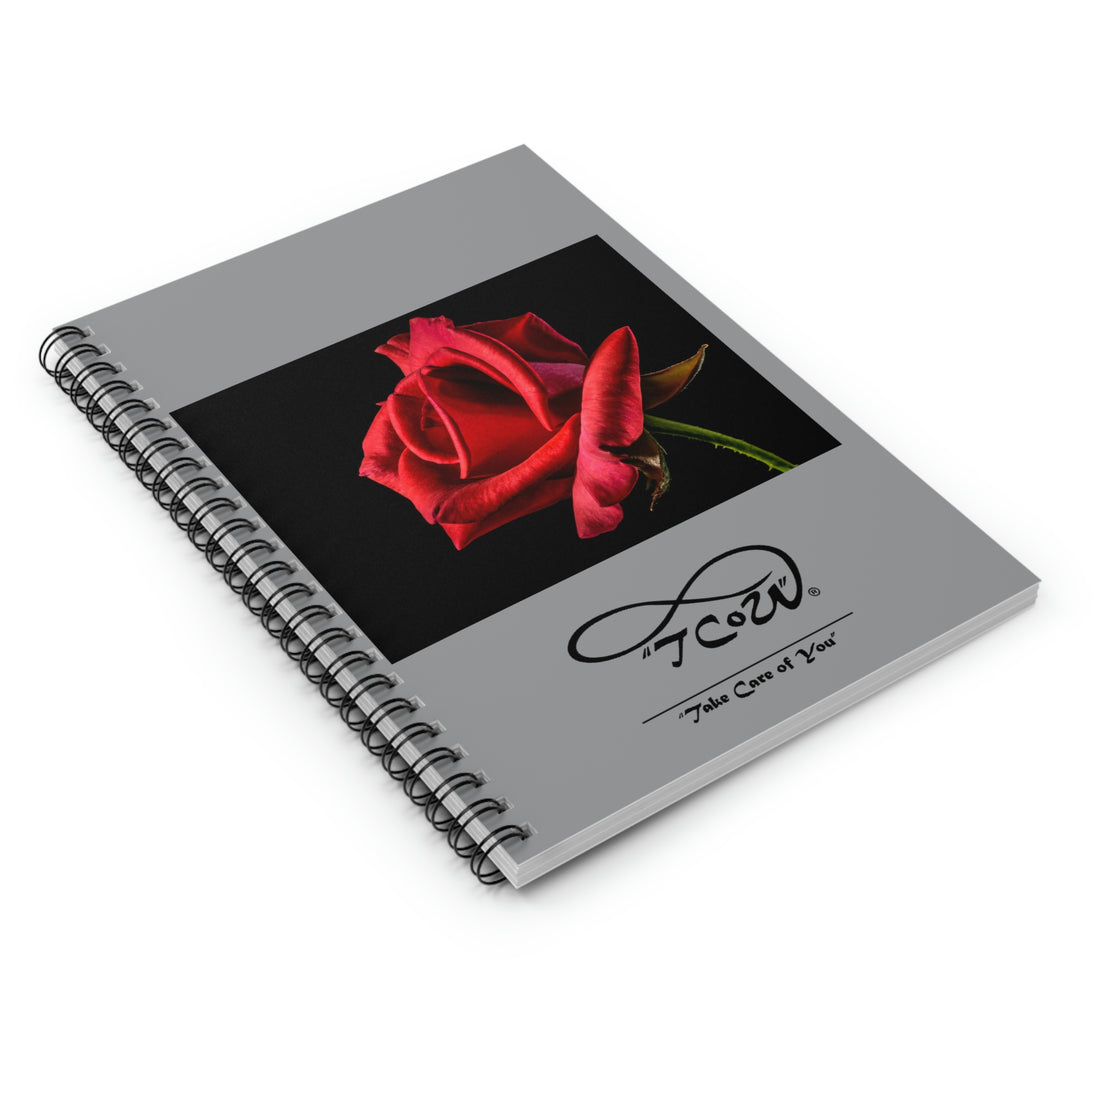 A Special Rose - Spiral Notebook - Ruled Line